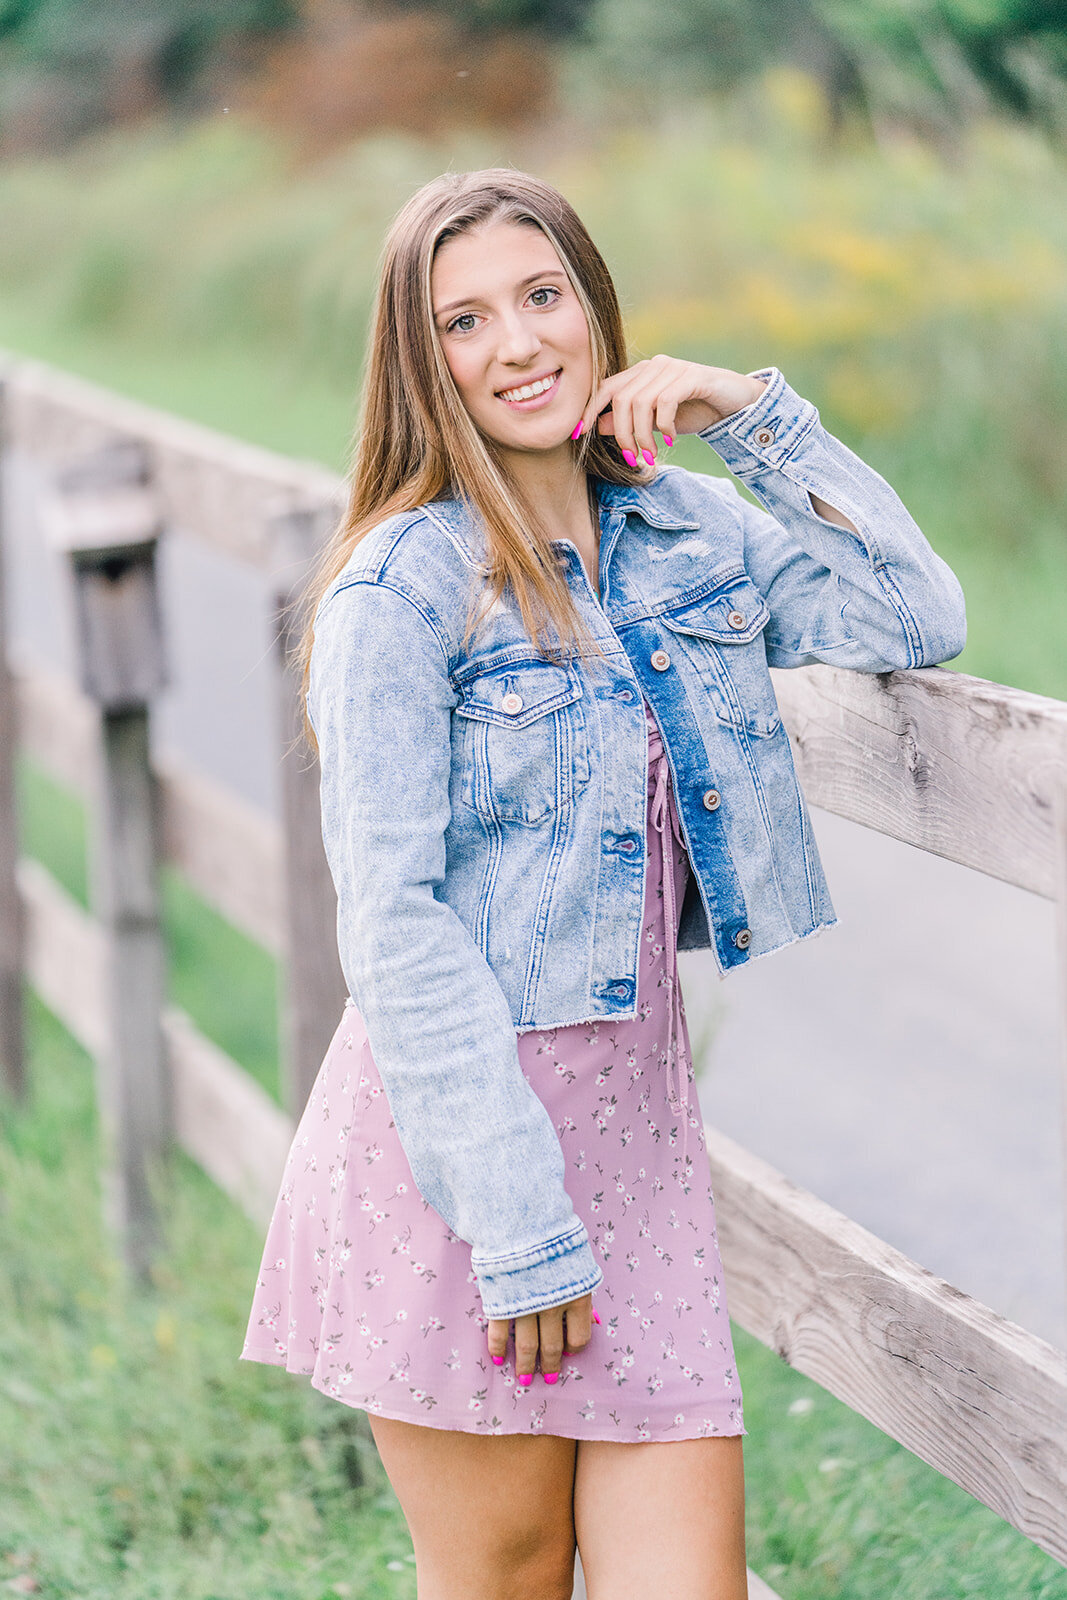 Senior picture Photographer in Maryland